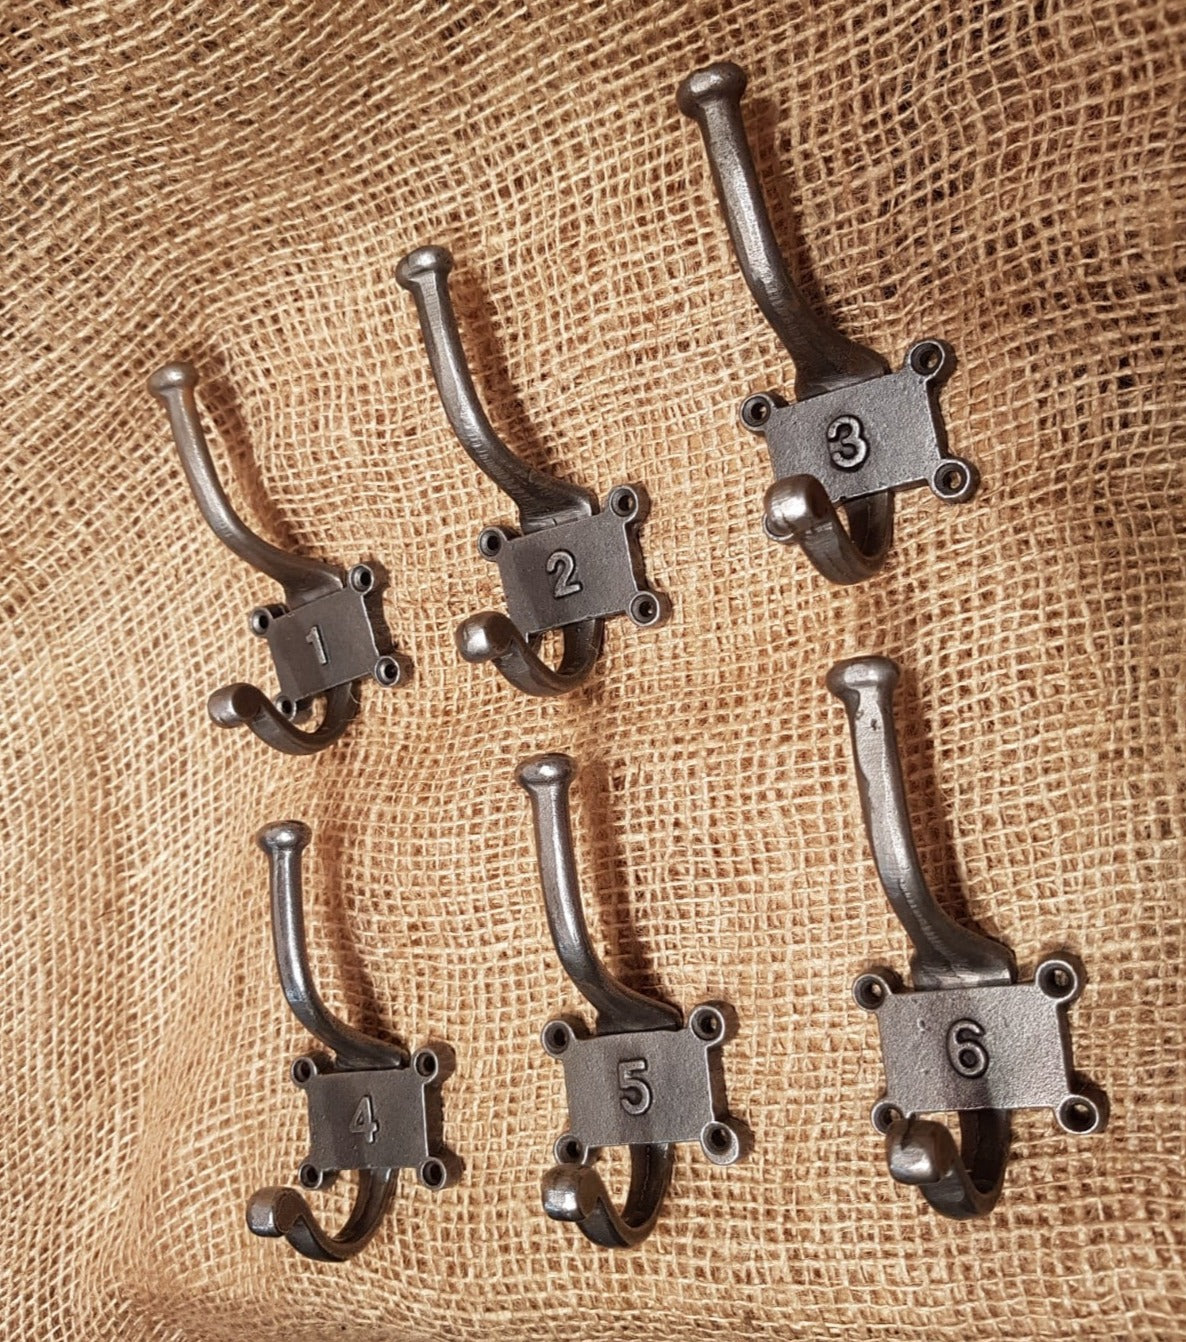 PACK of 5 SCHOOL HOUSE Victorian Cast Iron Hat and Coat Hook Vintage Retro  Old Style Coat Hooks -  UK